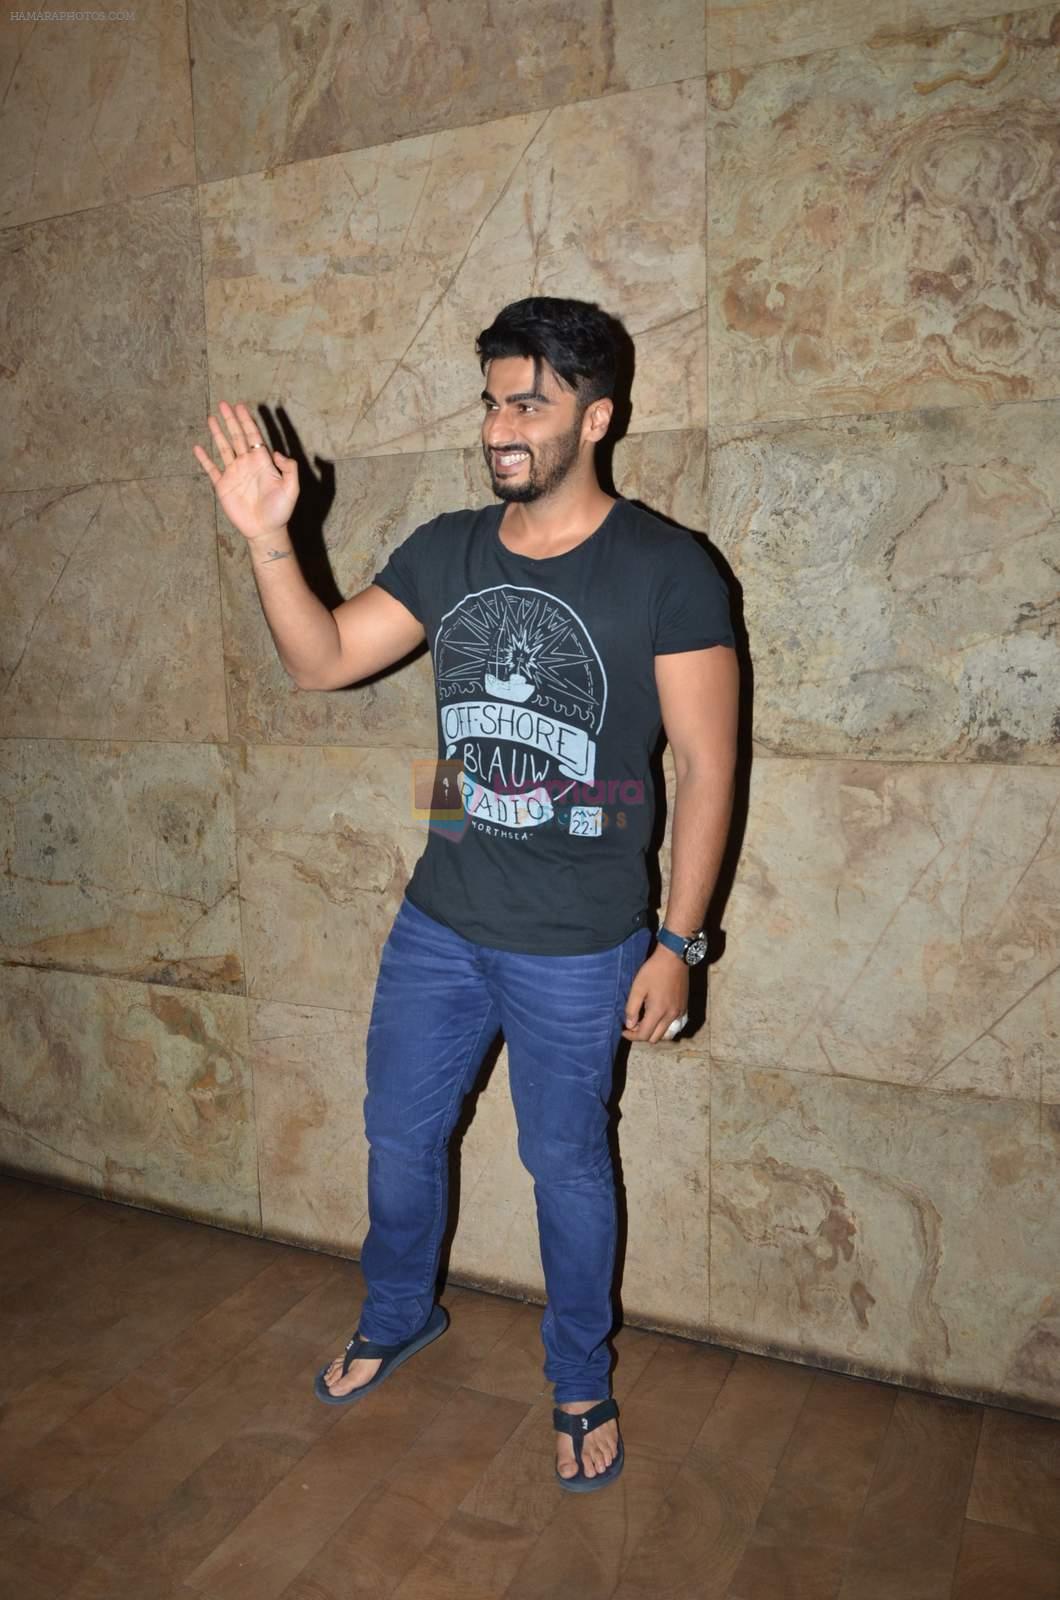 Arjun Kapoor at Welcome Back 2 screening in Lightbox on 4th Sept 2015